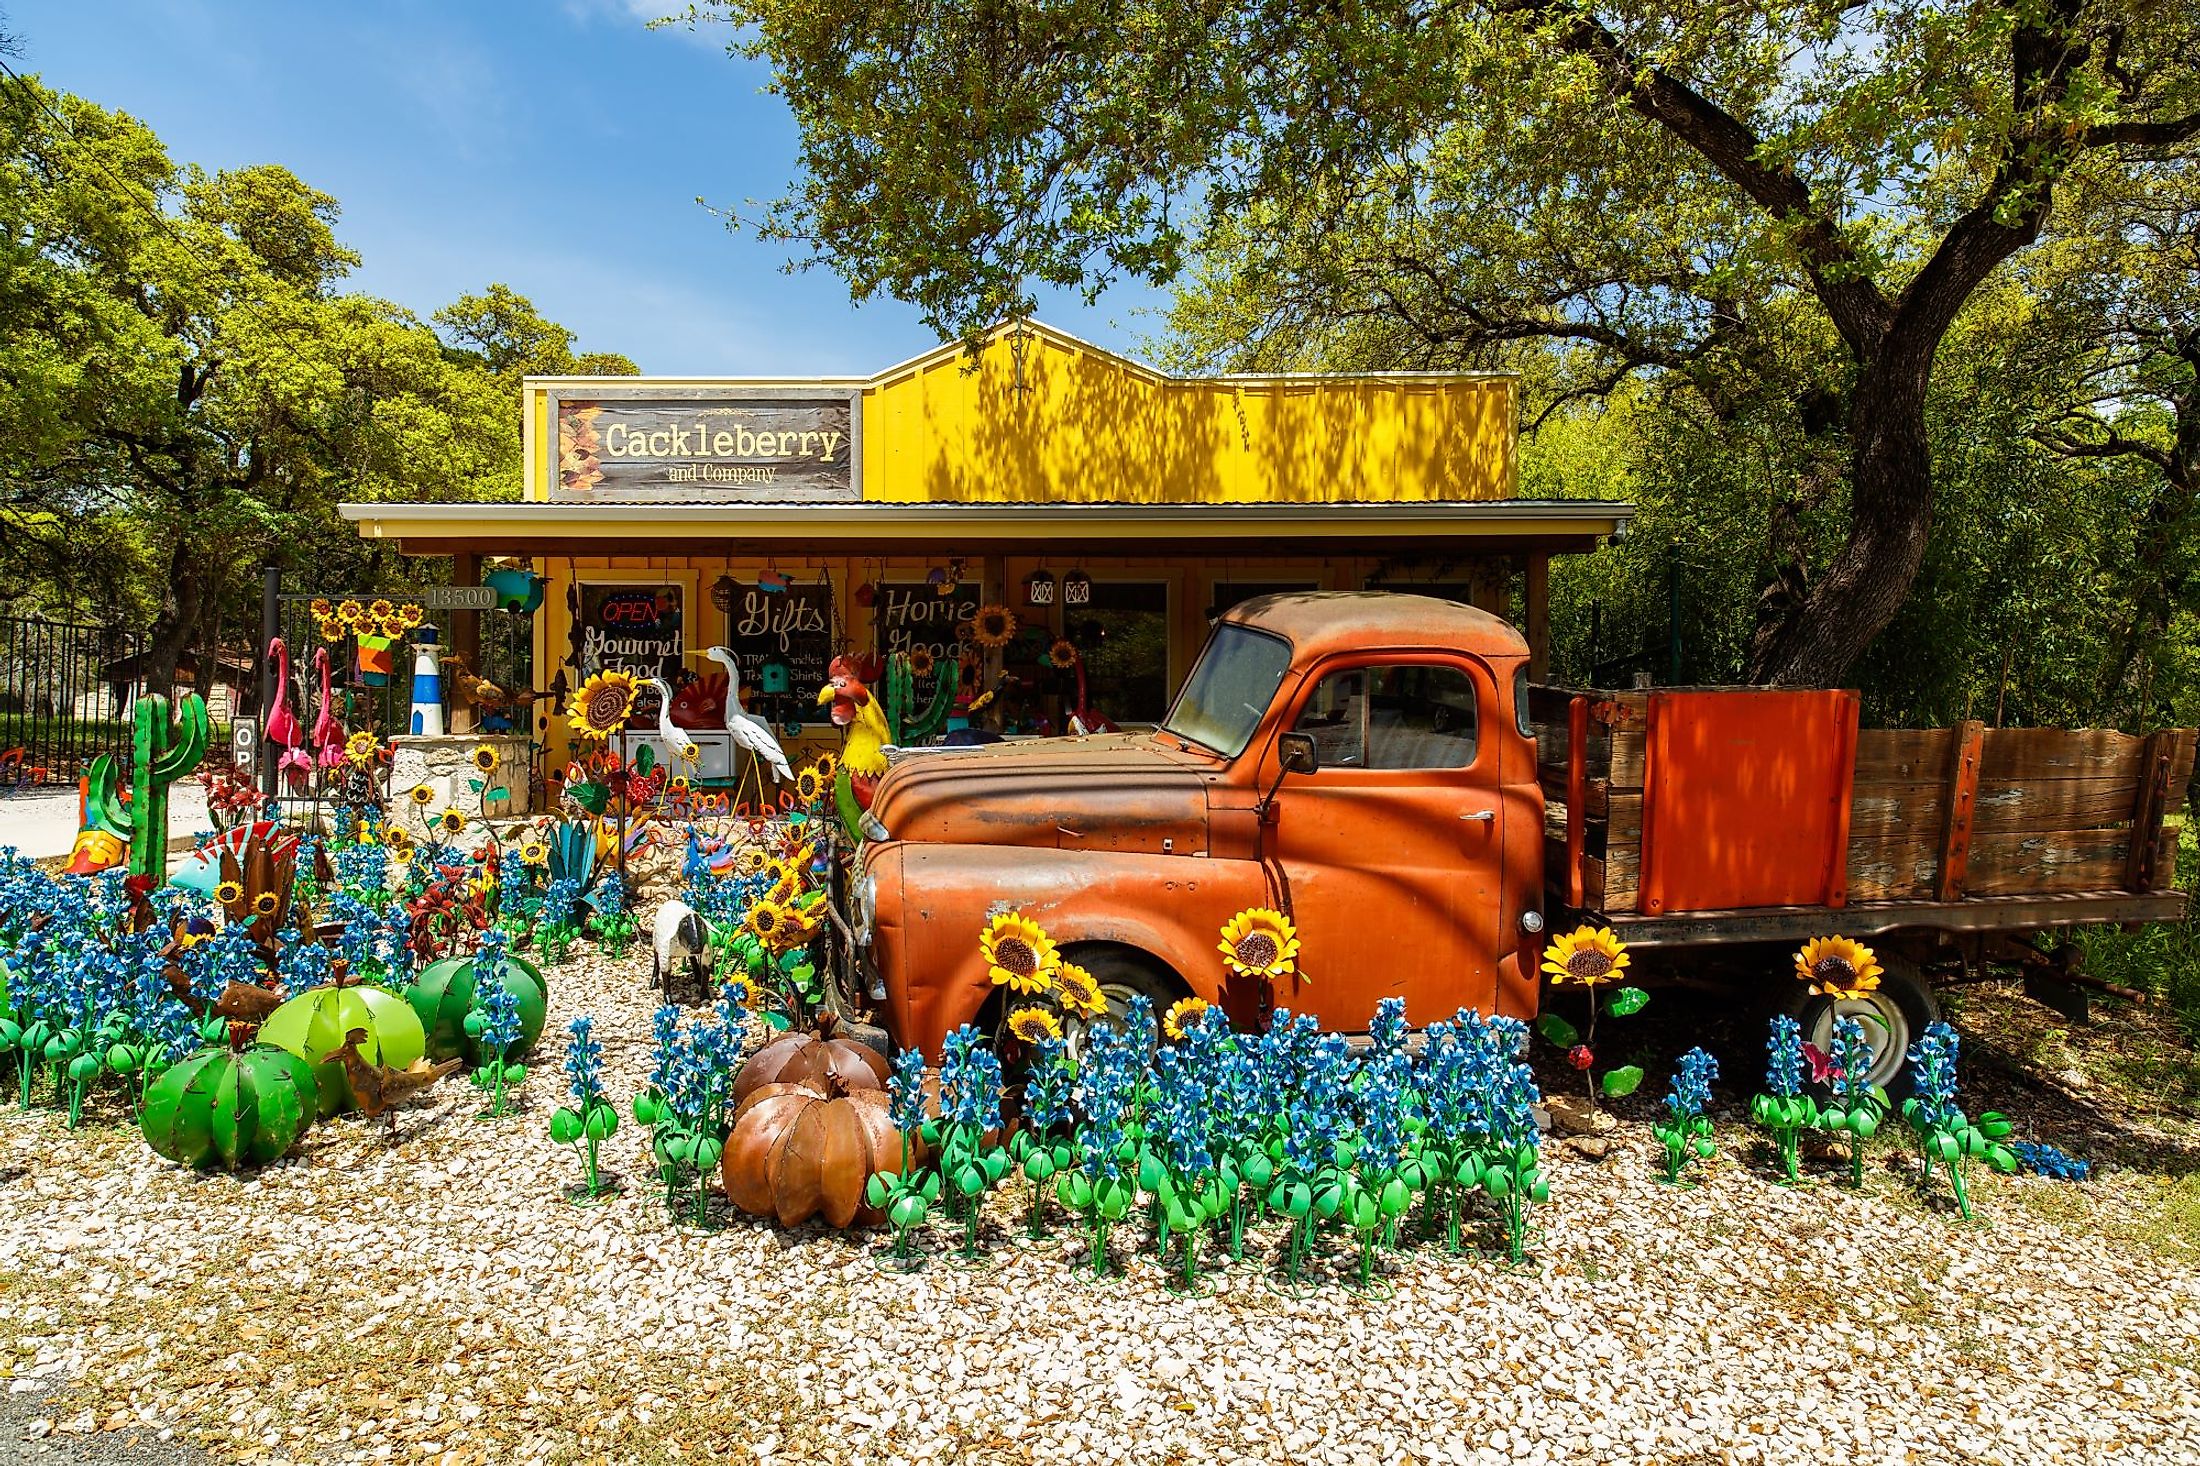 Colorful shop with artwork and vintage items on display in Wimberley, Texas. Editorial credit: Fotoluminate LLC / Shutterstock.com